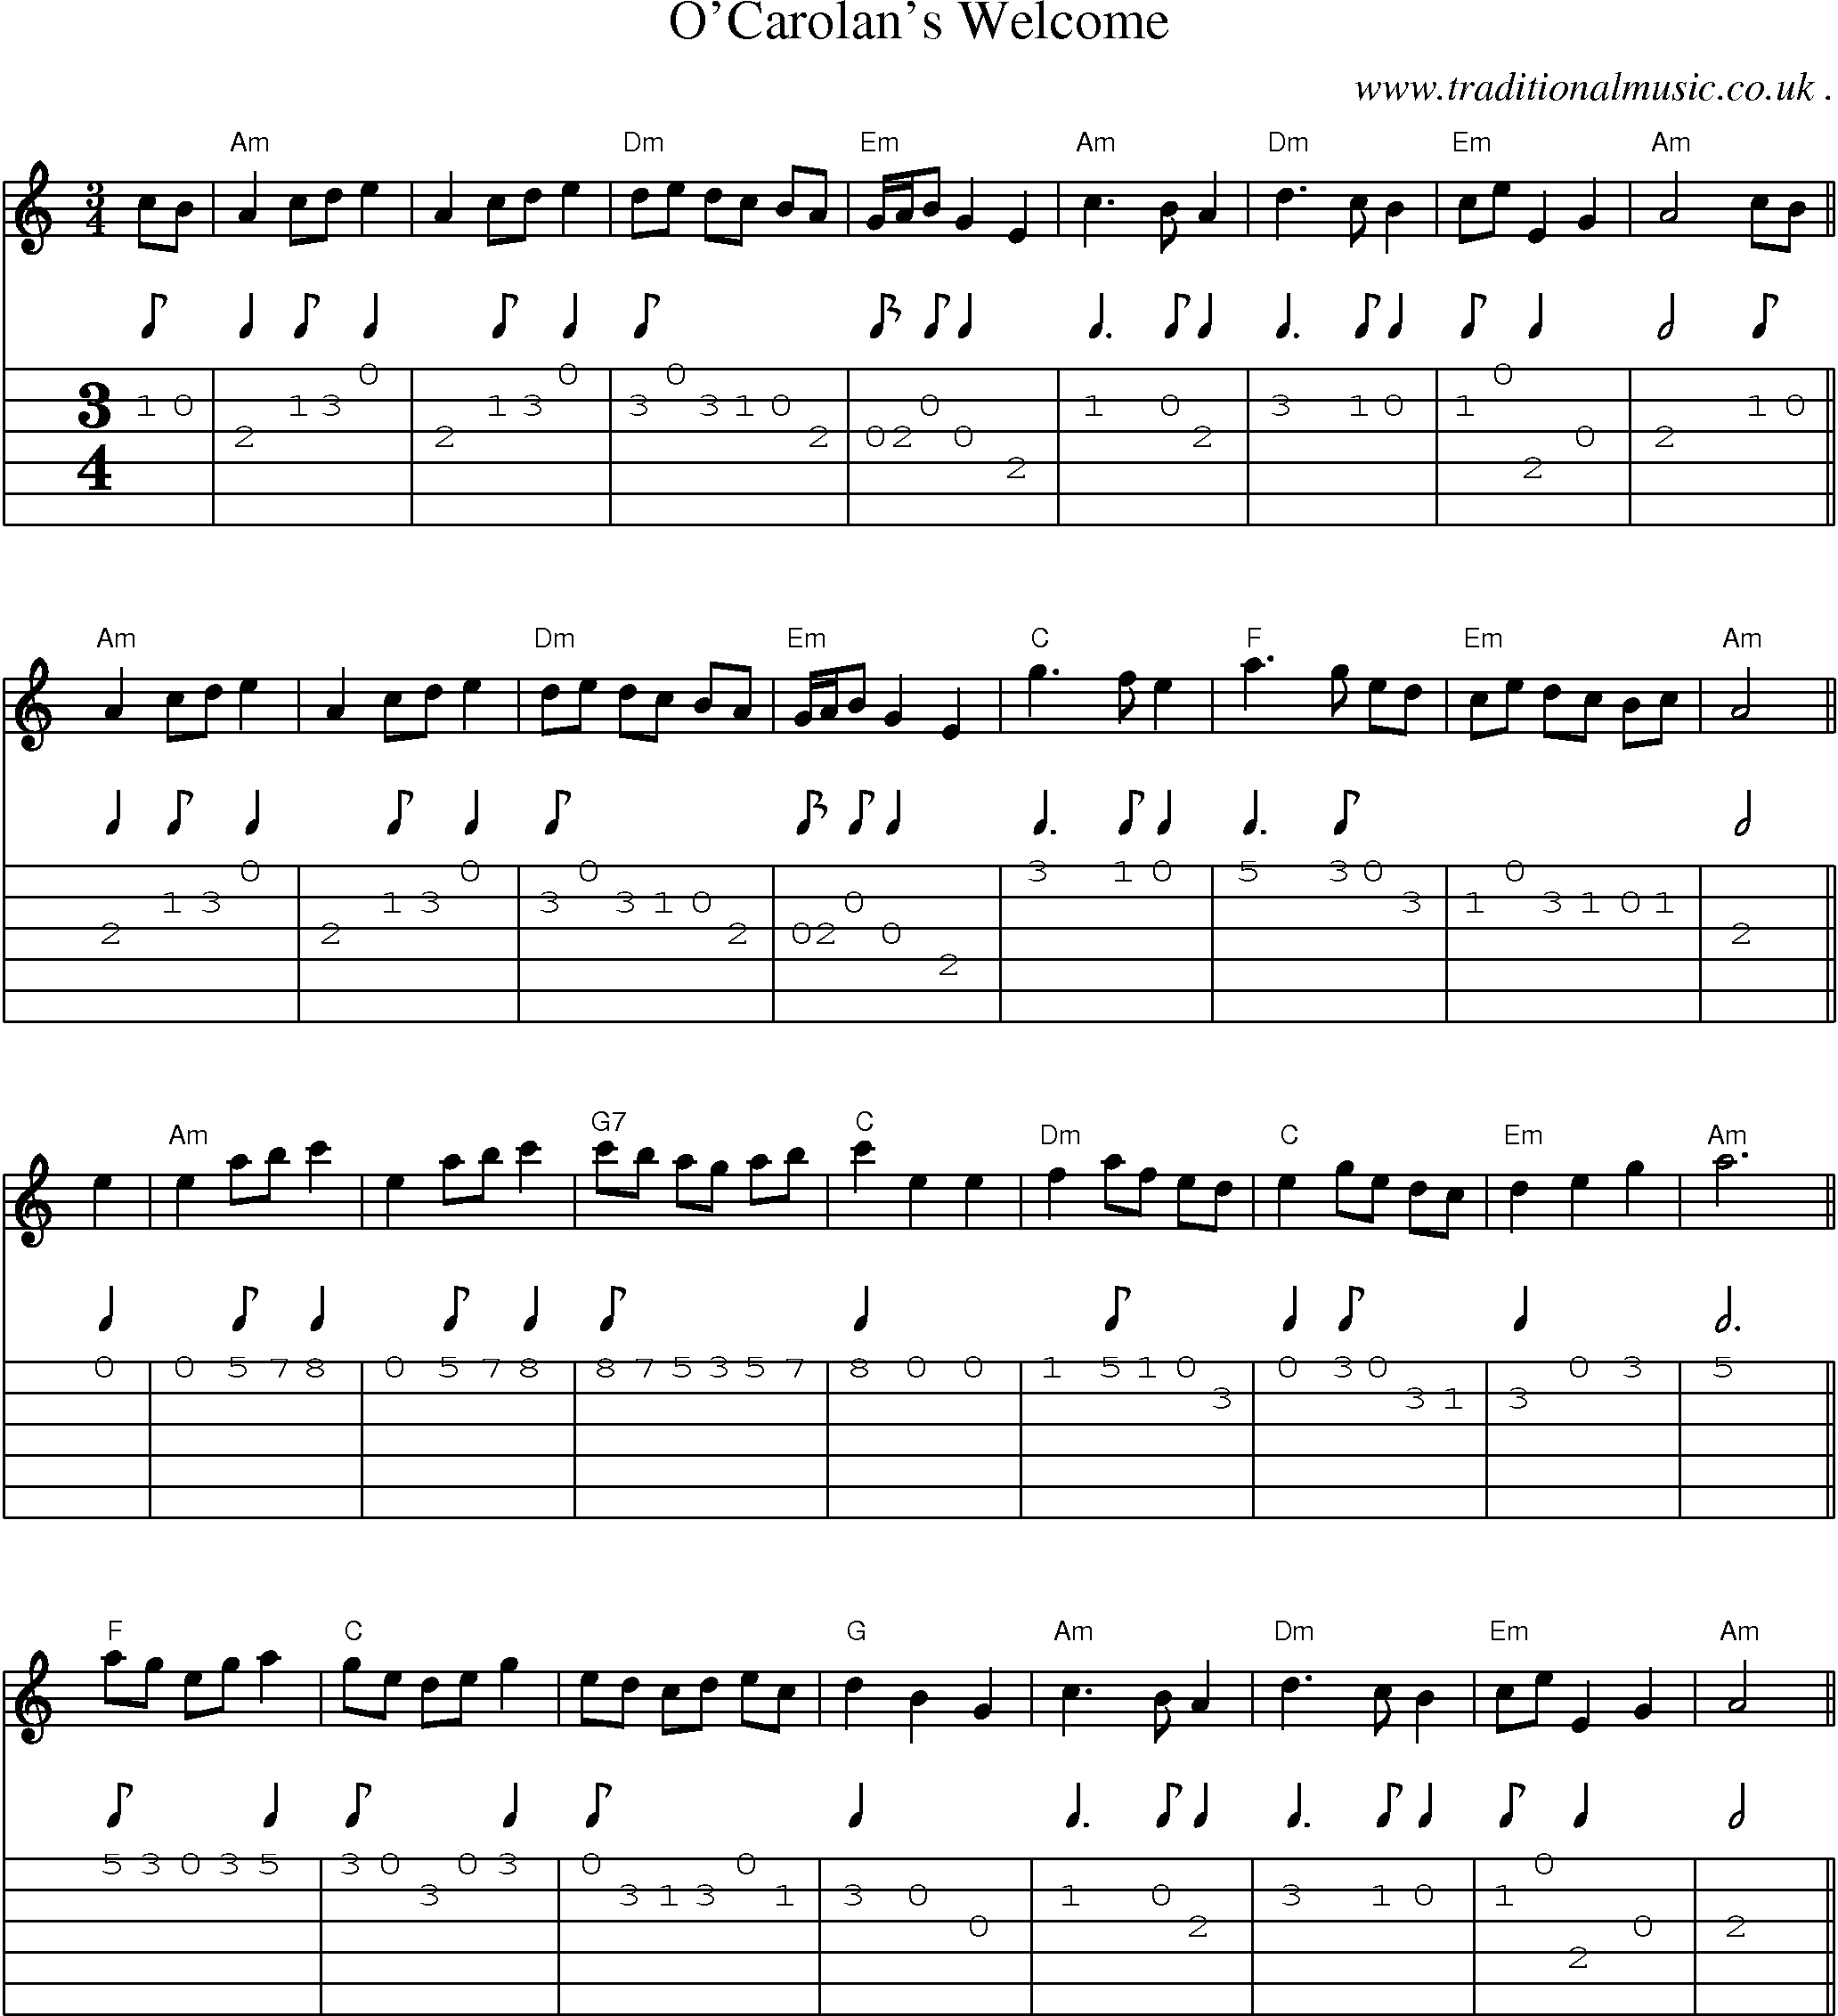 Music Score and Guitar Tabs for OCarolans Welcome